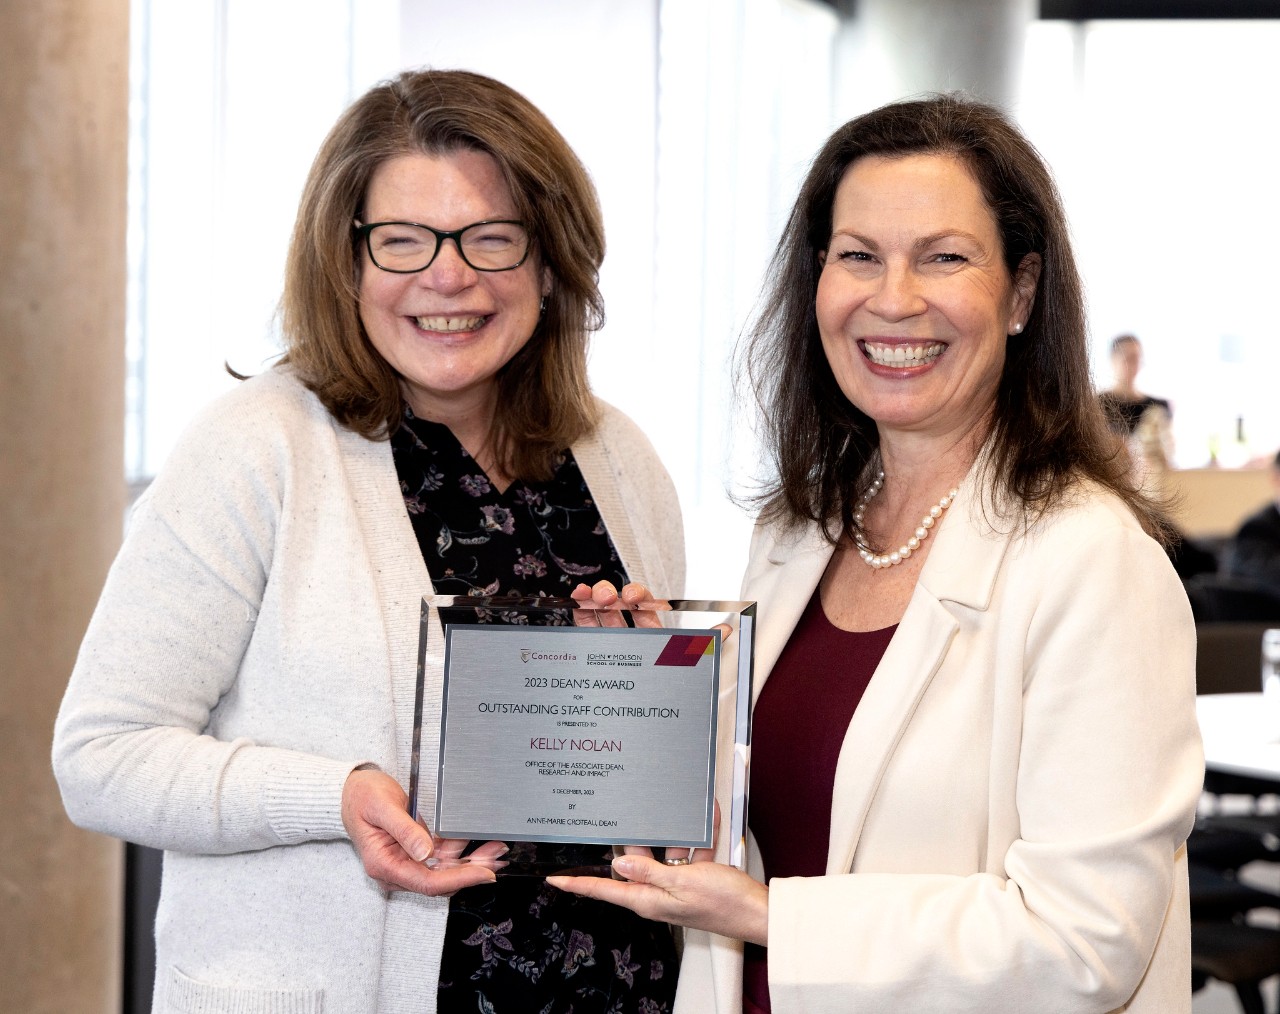 Kelly Nolan accepts her Outstanding Staff Contribution Award alongside Dean Anne-Marie Croteau